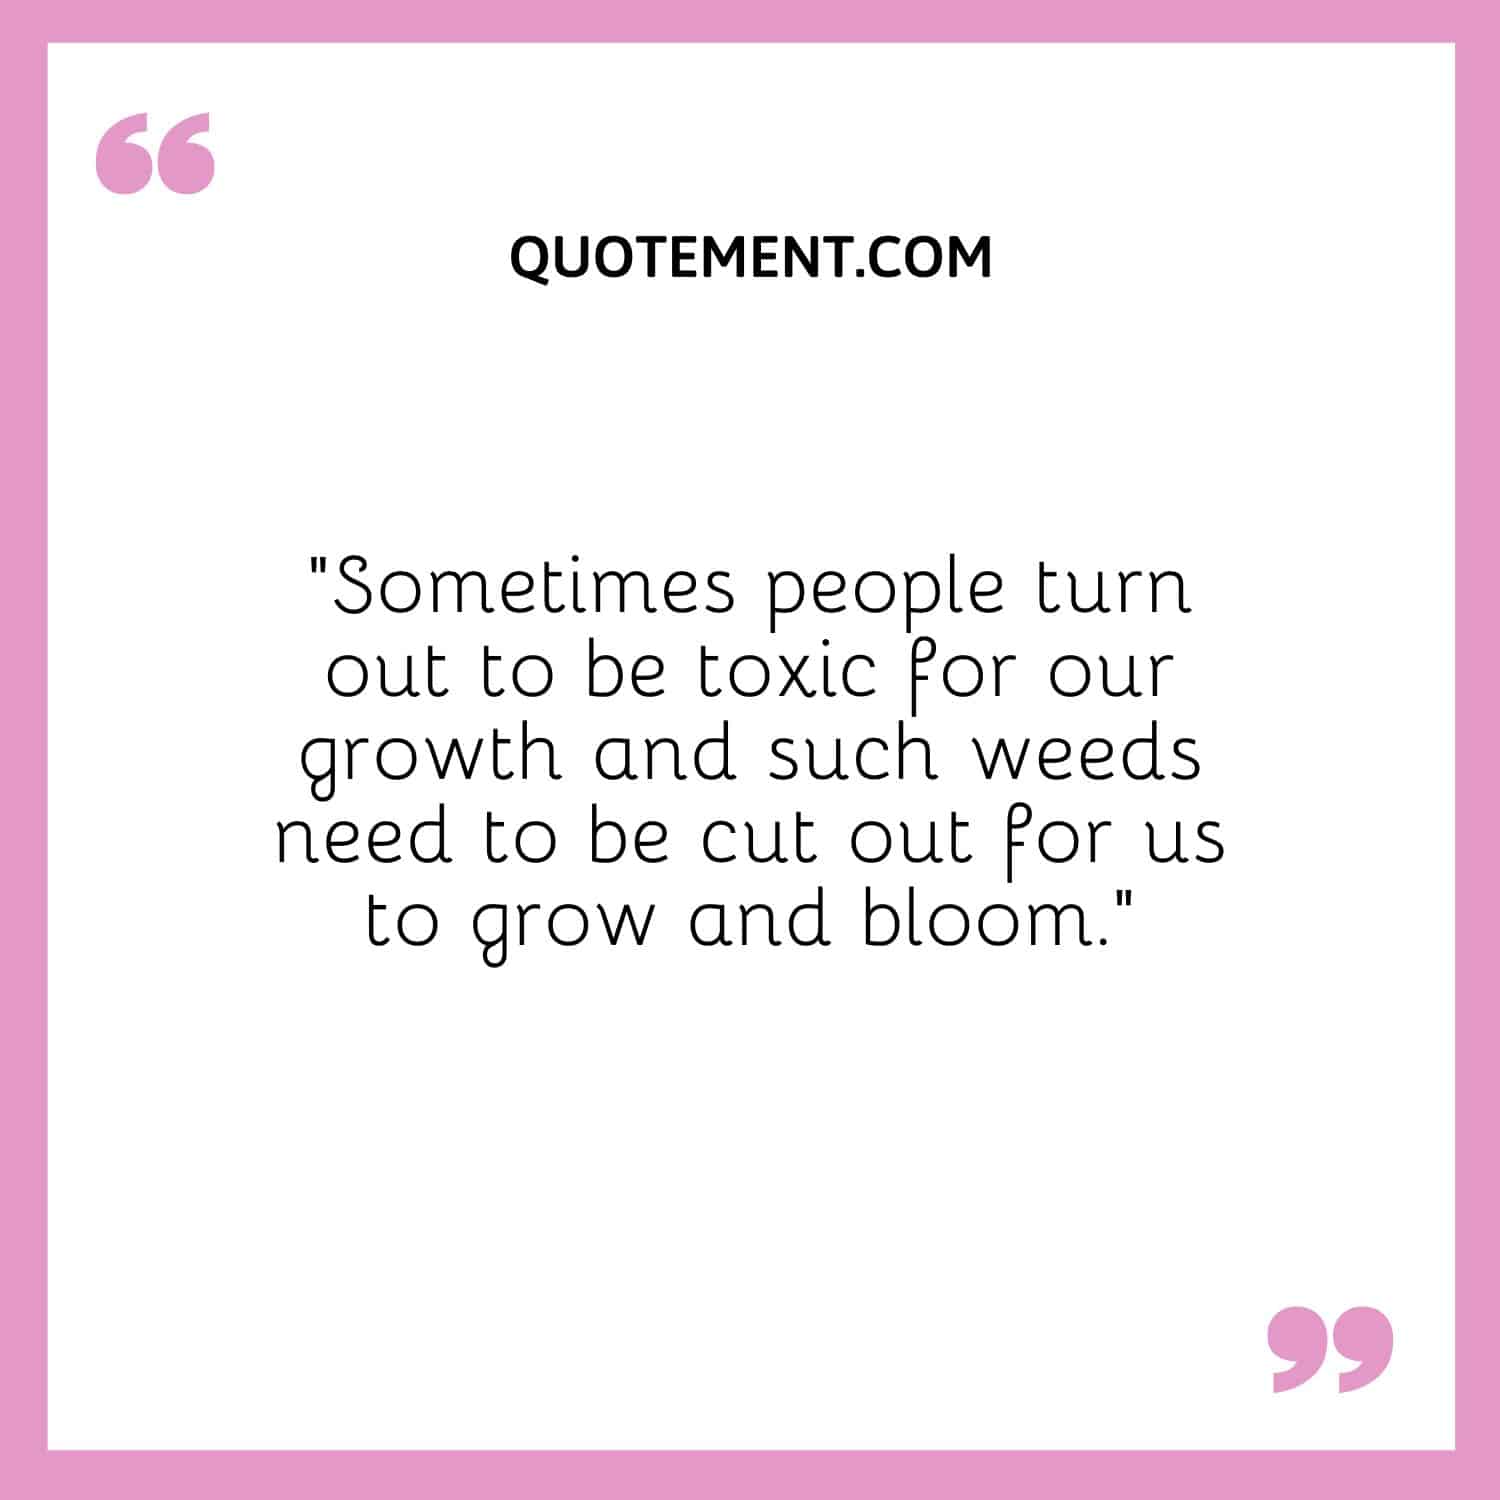 “Sometimes people turn out to be toxic for our growth and such weeds need to be cut out for us to grow and bloom.”